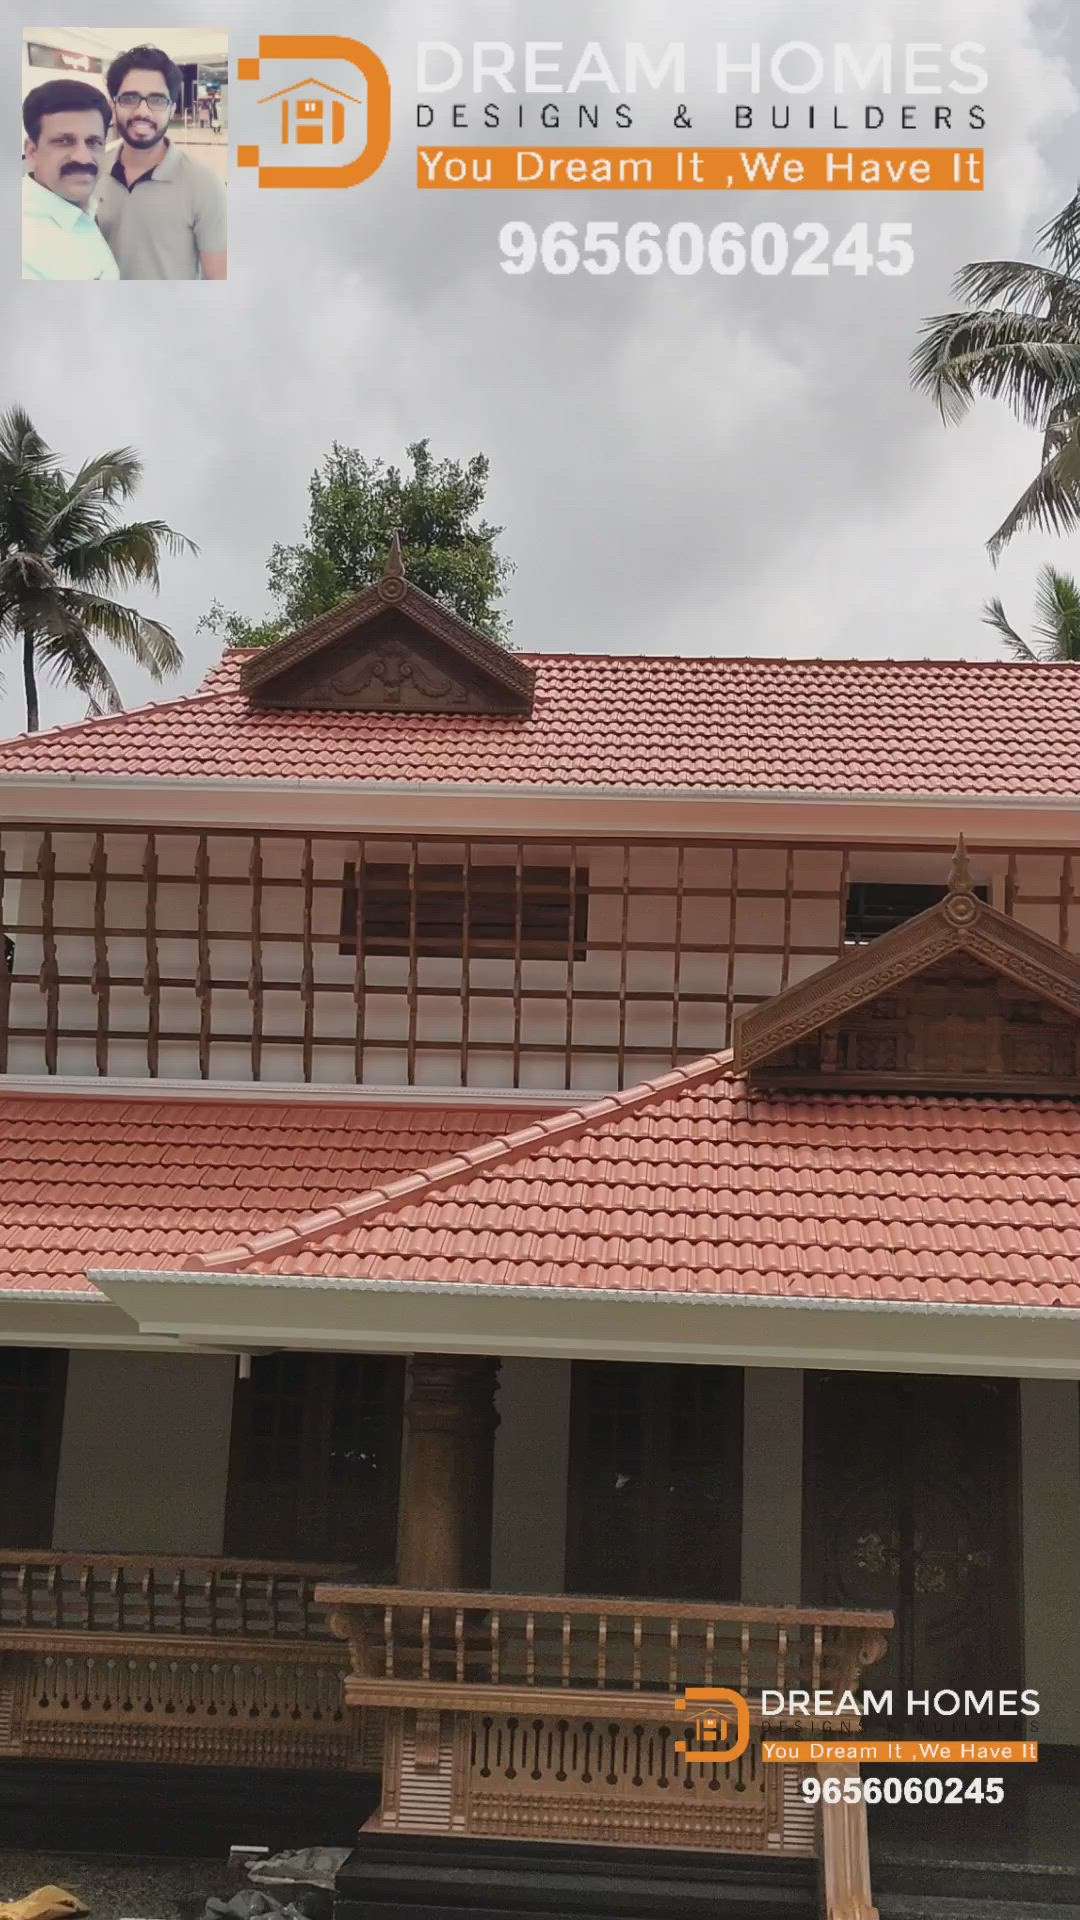 "DREAM HOMES DESIGNS & BUILDERS "
You Dream It, We Have It !

       "Kerala's No 1 Architect for Traditional Homes"

ടോട്ടൽ ഏരിയ : 2700 sqft.
ലൊക്കേഷൻ : മുരിങ്ങുർ ചാലക്കുടി

We strongly believe in your dreams and you strongly believe in our architecture.
Here is the finest example for that mix-up :-

No Compromise on Quality, Sincerity & Efficiency.
For more info 
9656060245
7902453187